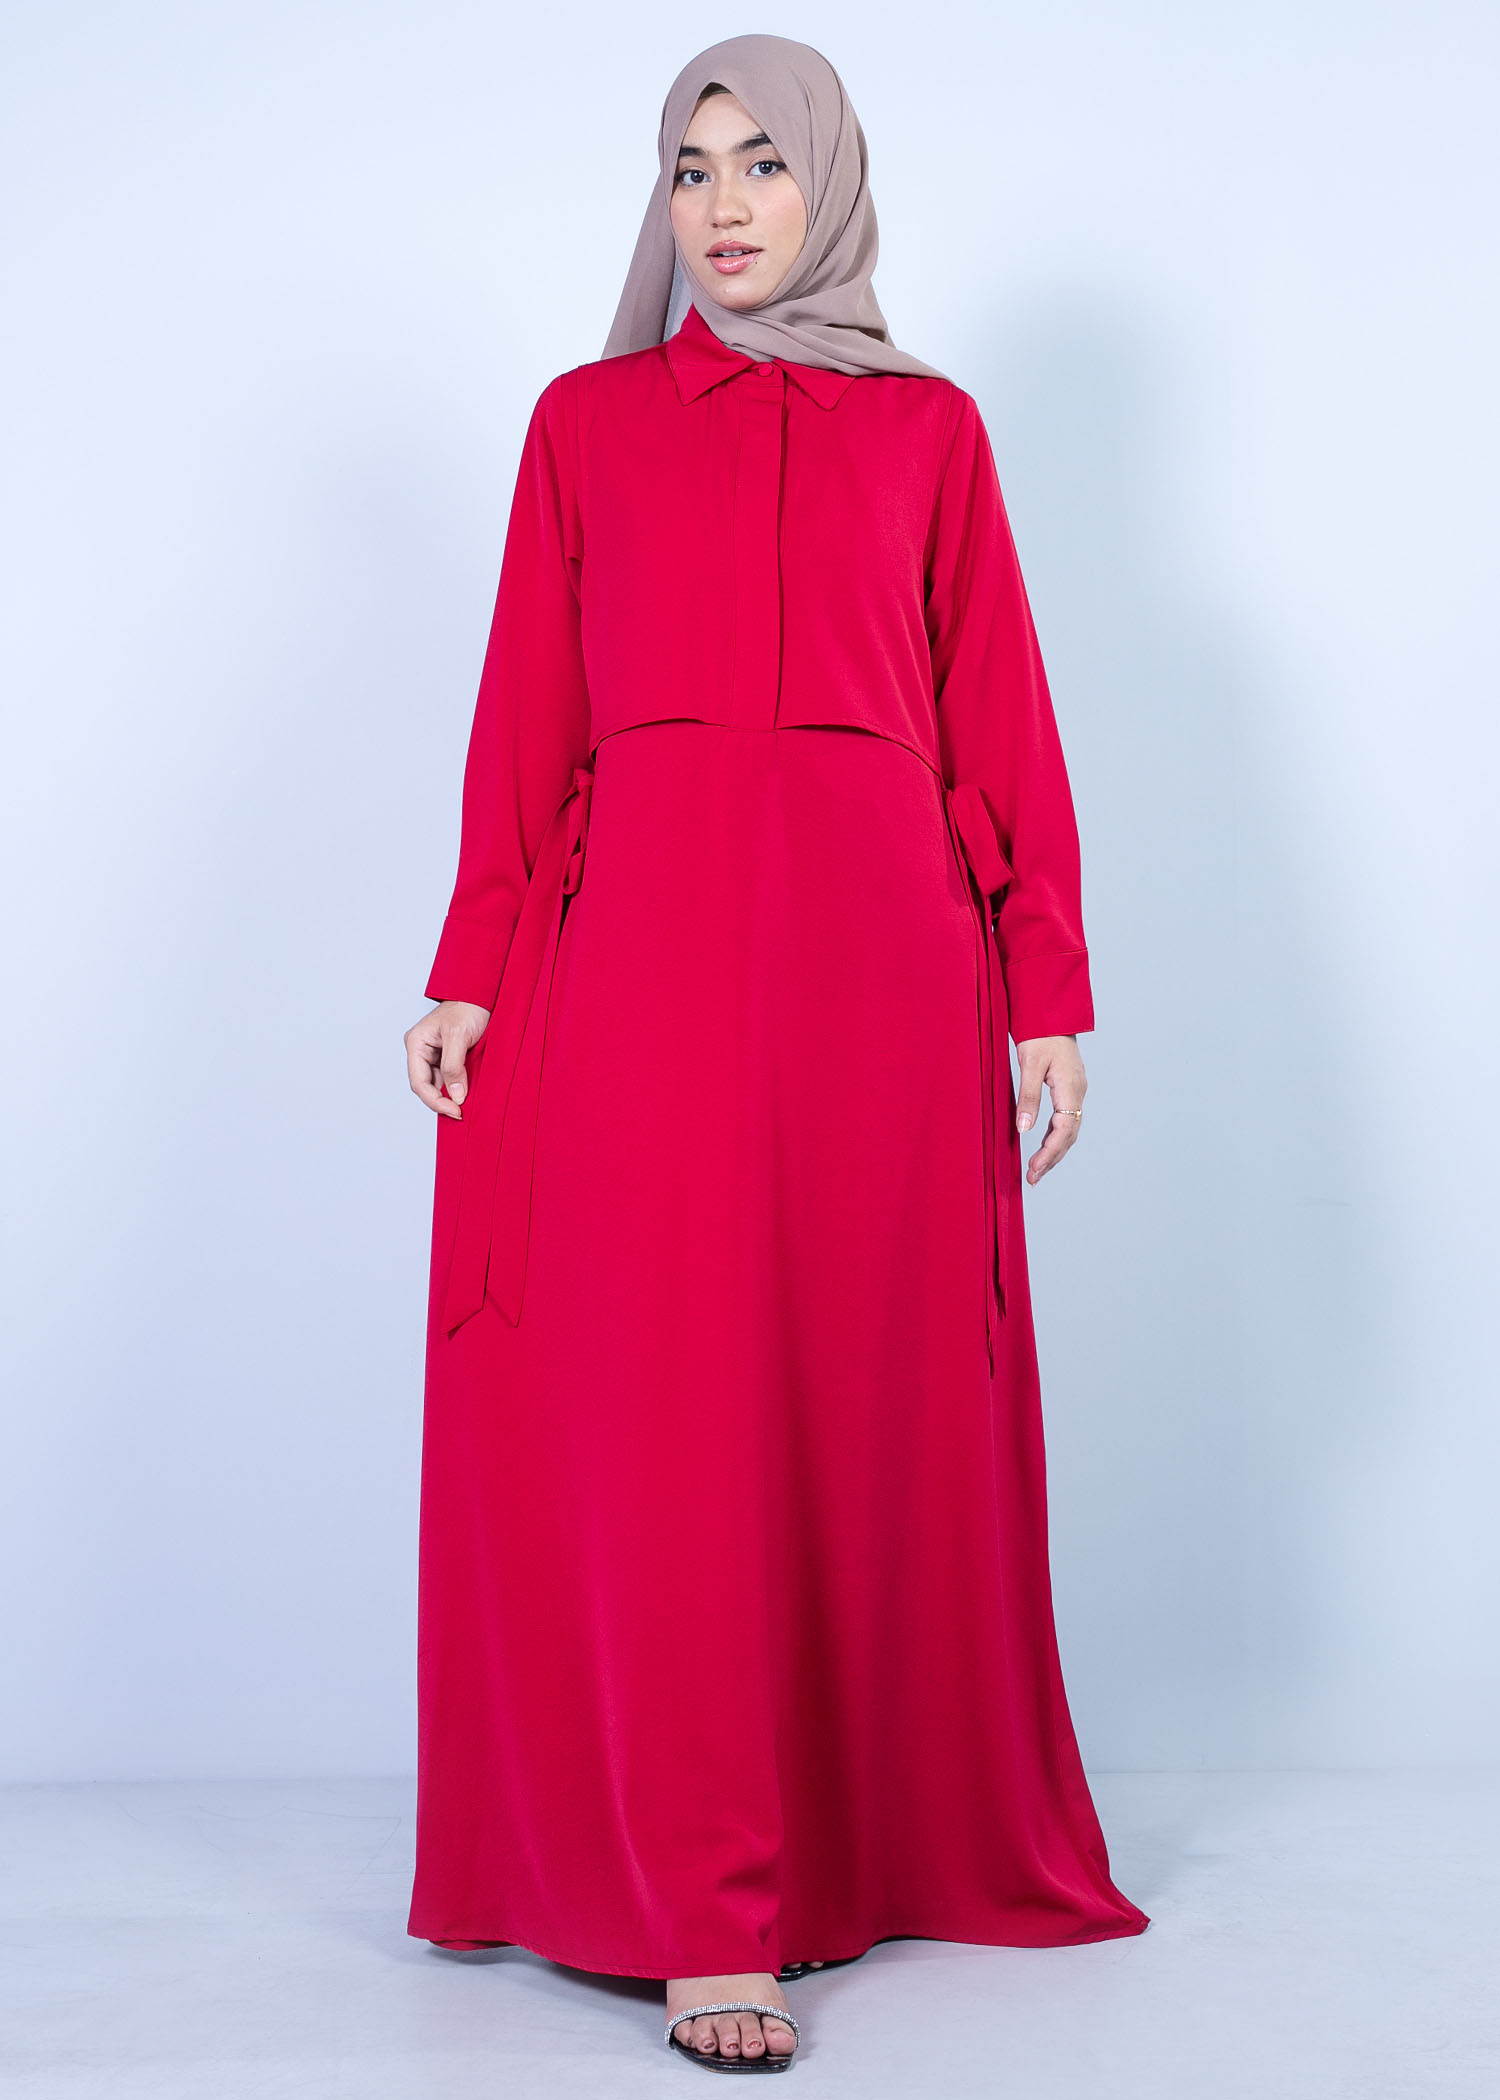 geum ladies long dress red color full front view